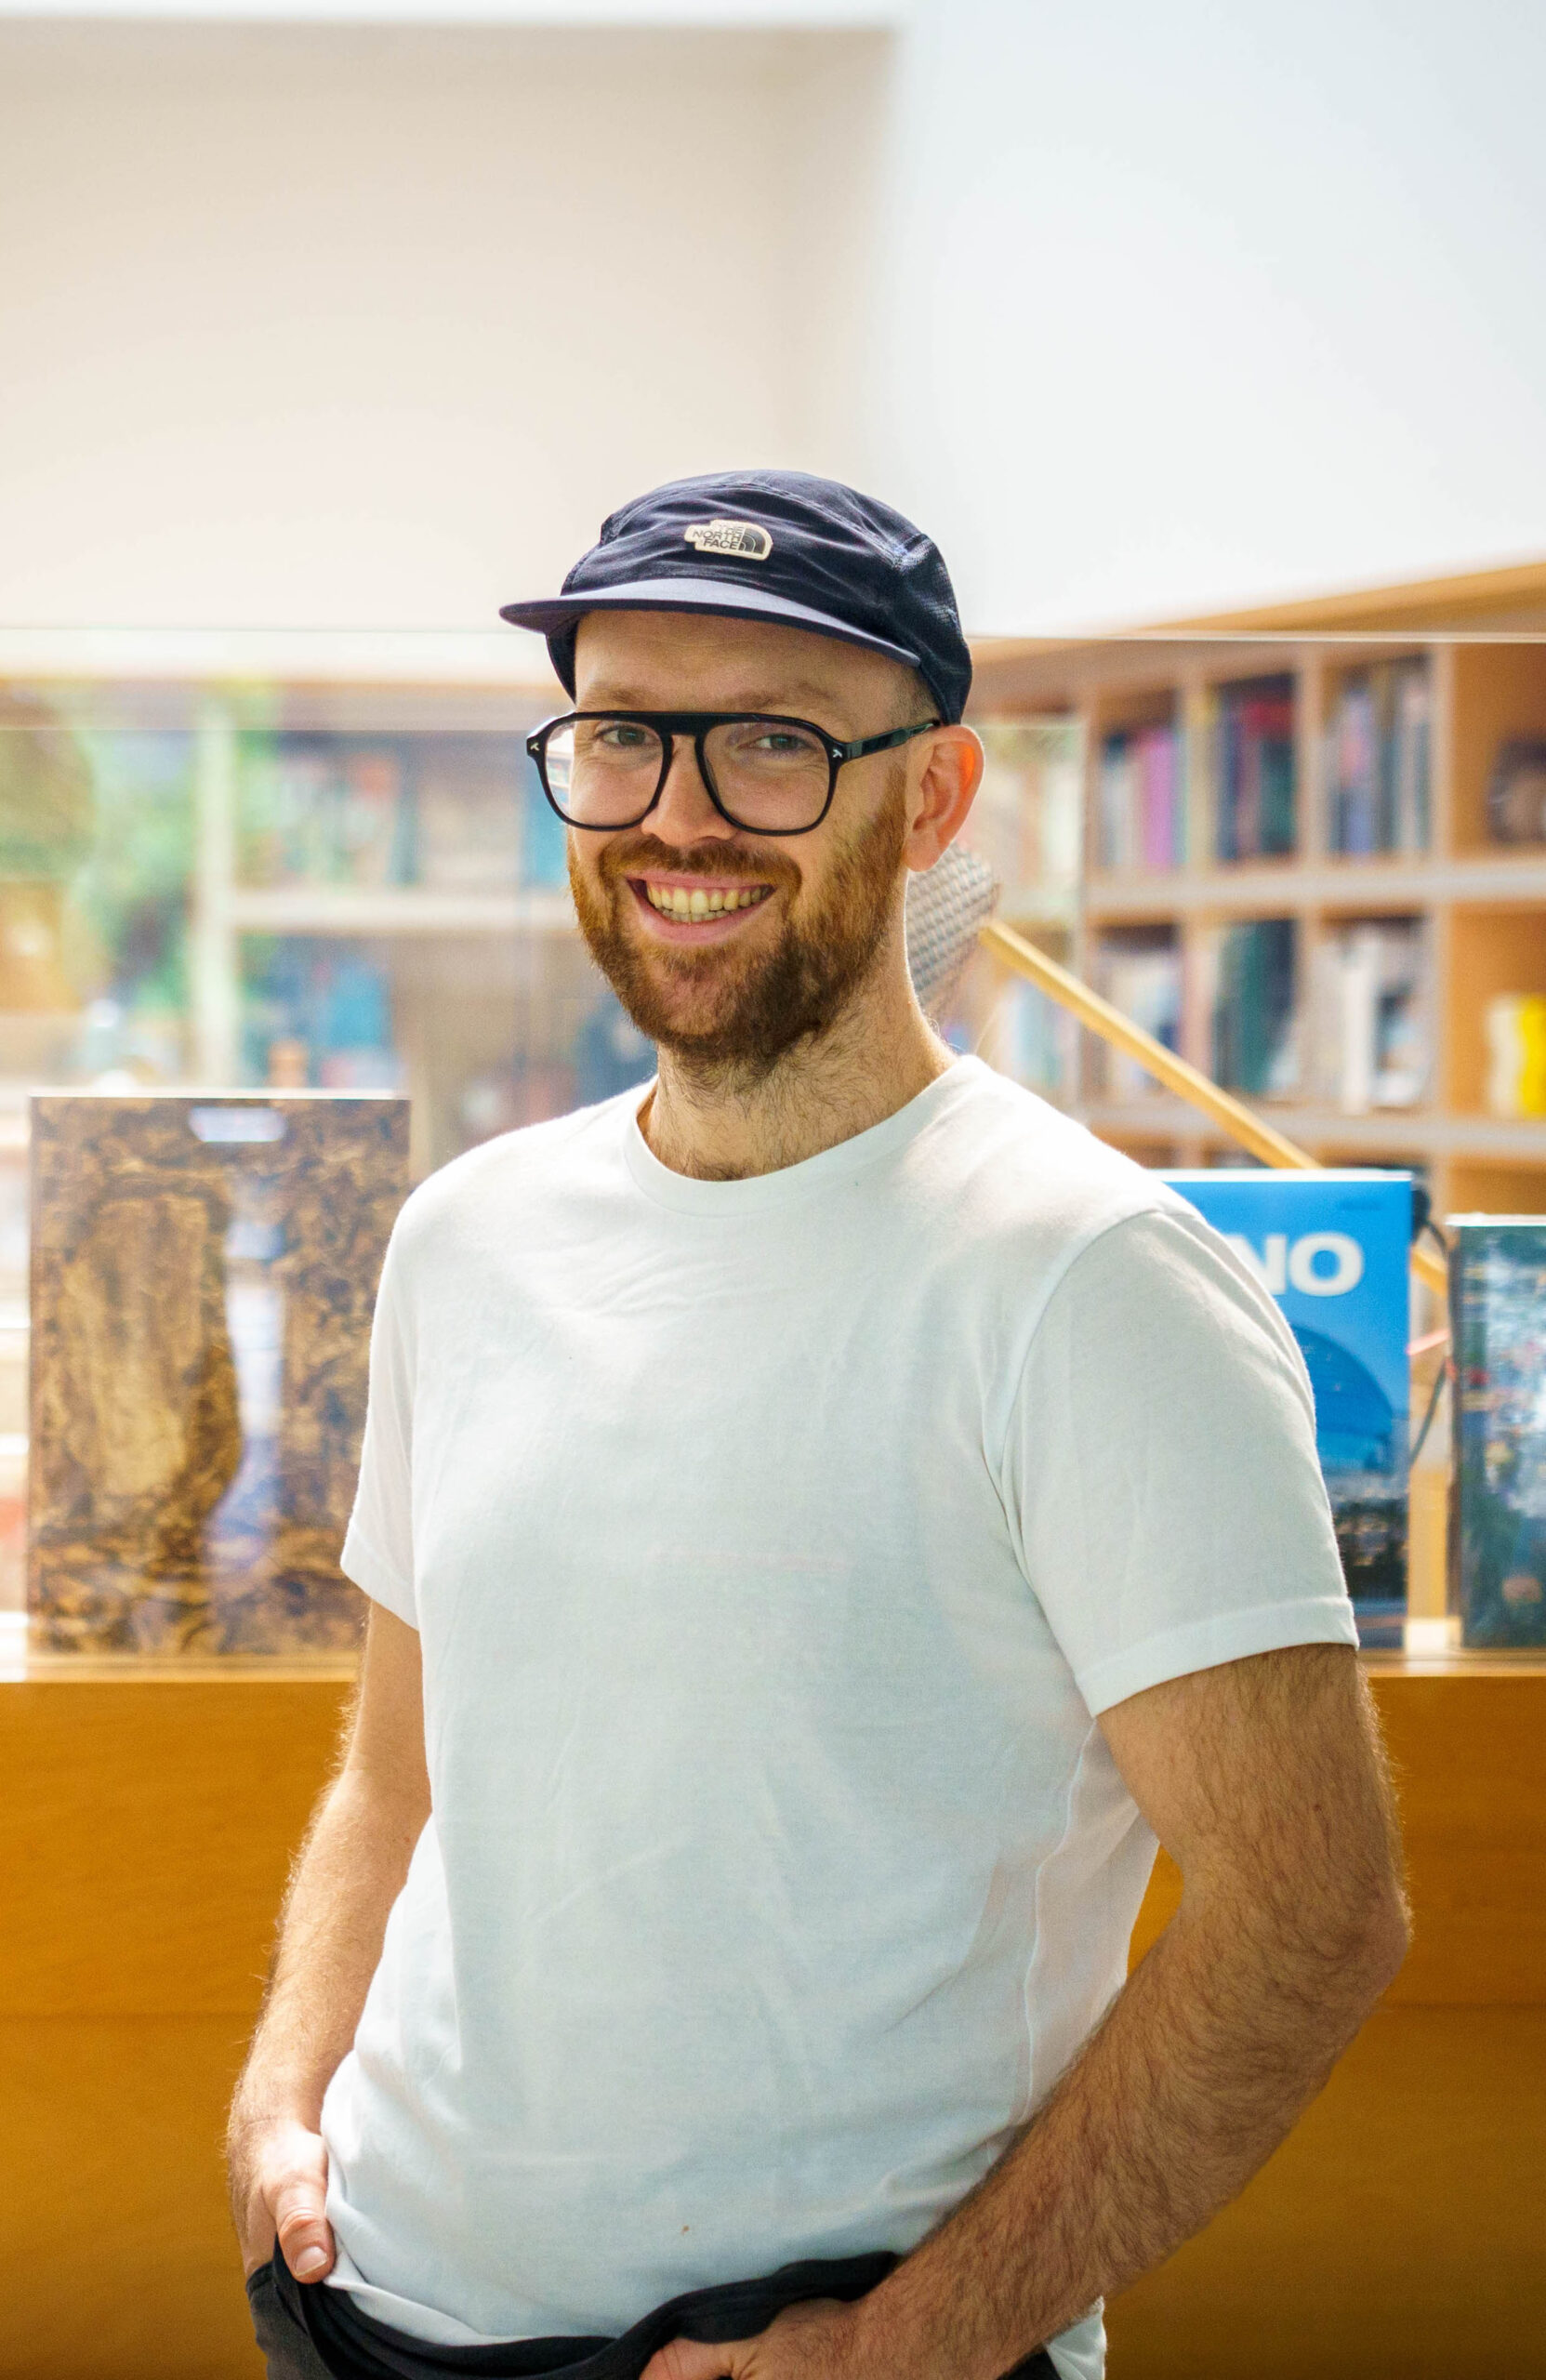 Patrick wears a blue hat with brim, large black framed glasses. He is fair skinned and has a full beard. He wears a casual white tee stand with hands in pockets with bookshelves in background.